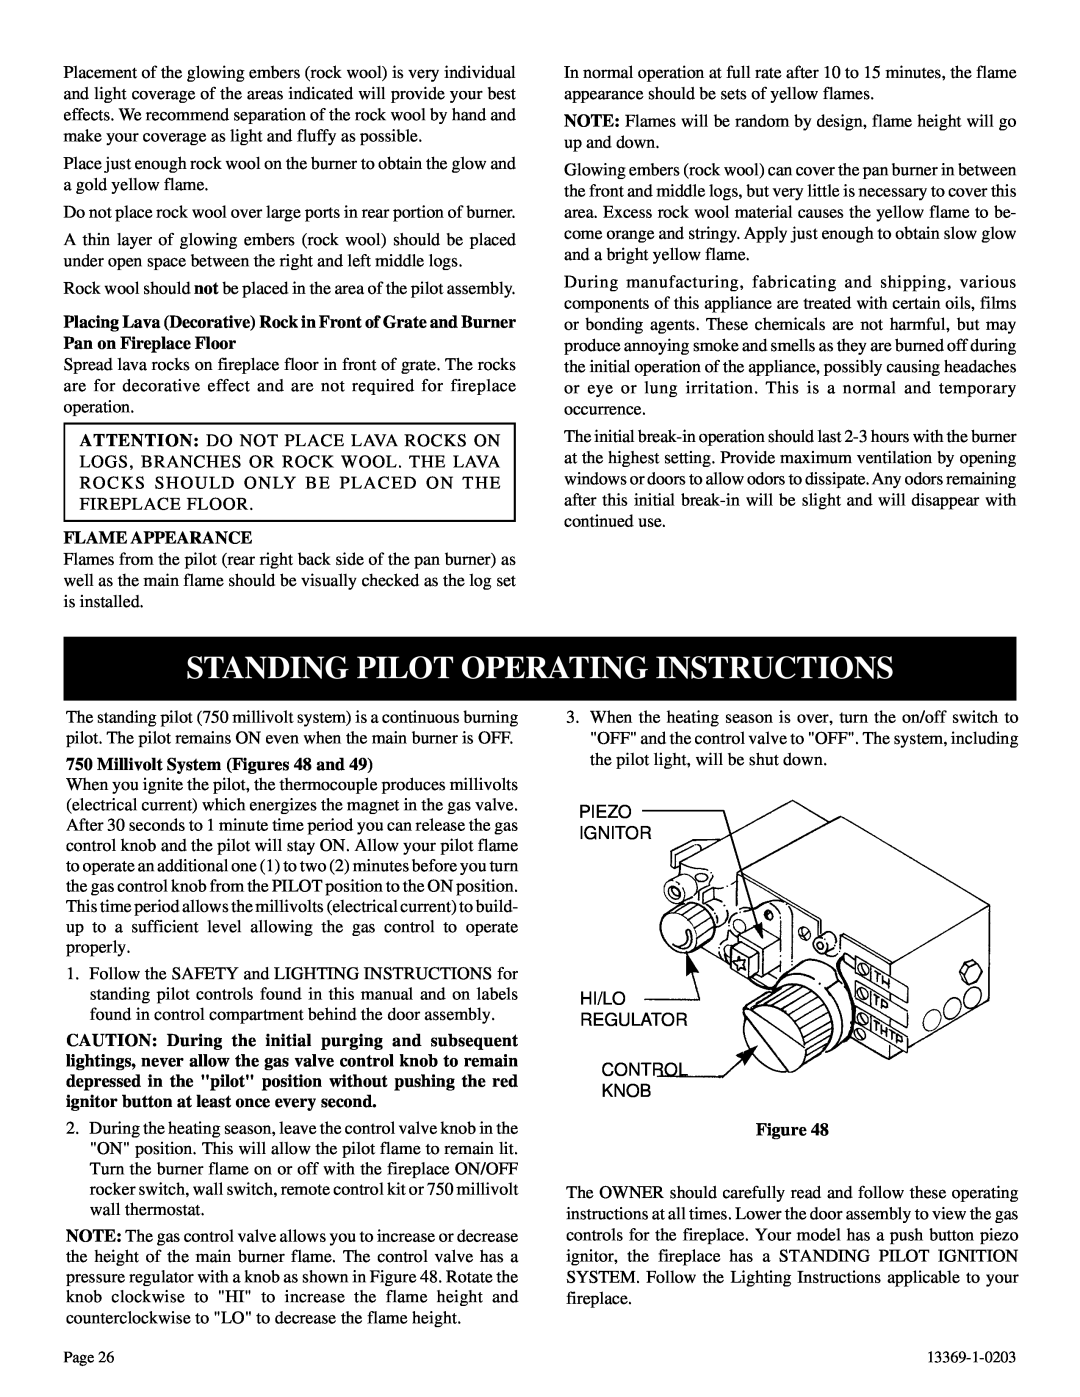 DVS 30-2 installation instructions Standing Pilot Operating Instructions, Flame Appearance, Millivolt System Figures 48 and 